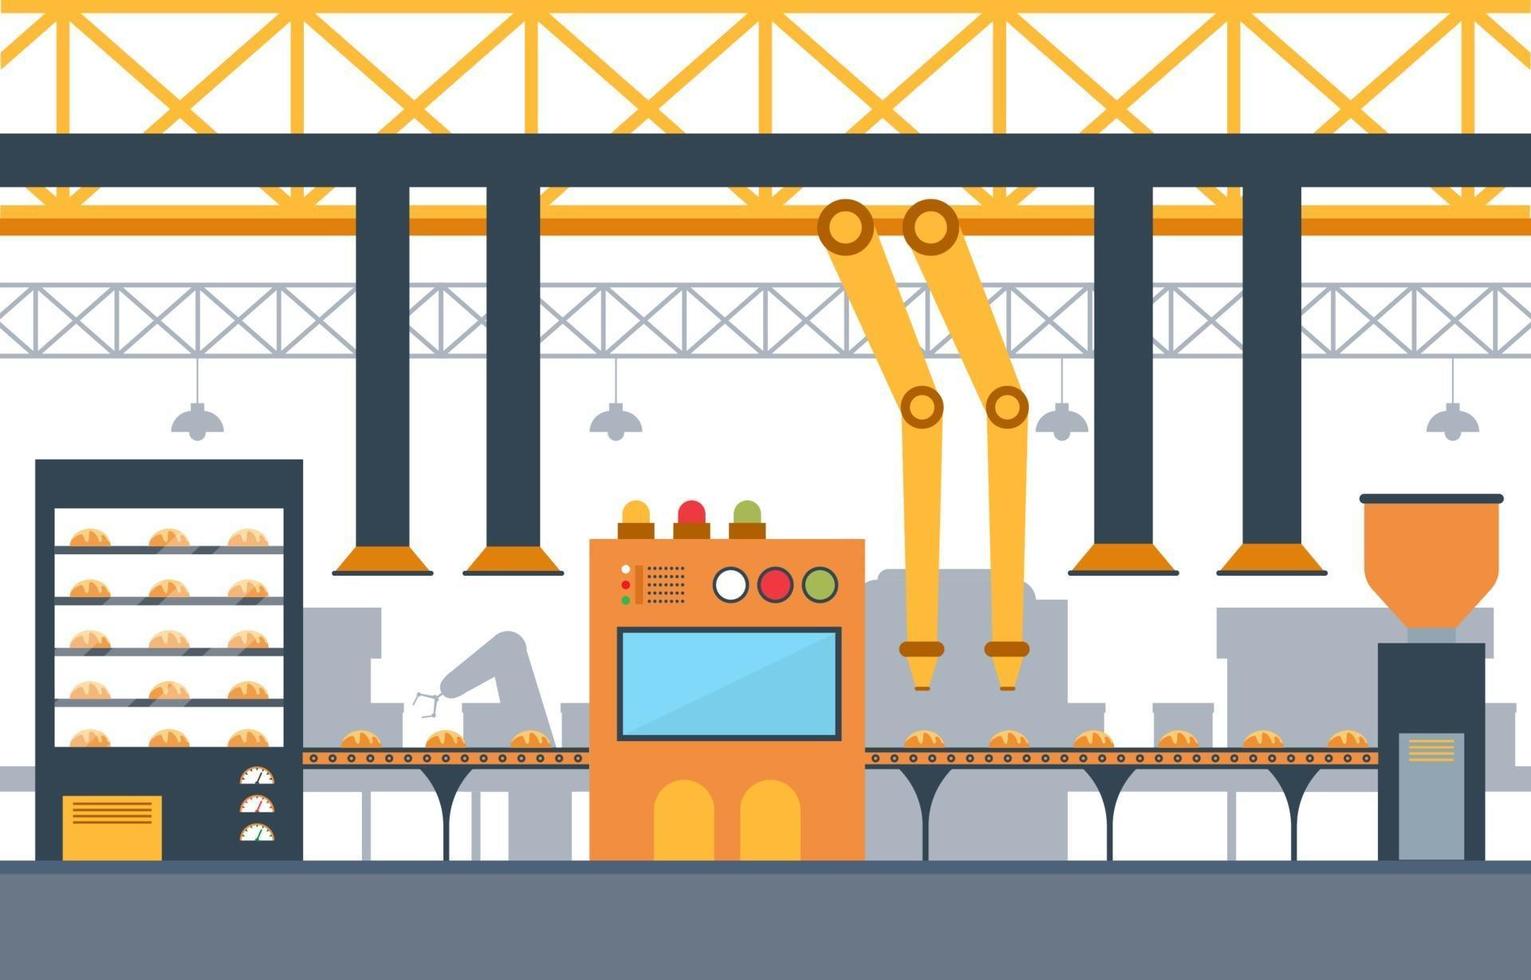 Industrial Factory with Conveyor Belt and Robotic Assembly Illustration vector